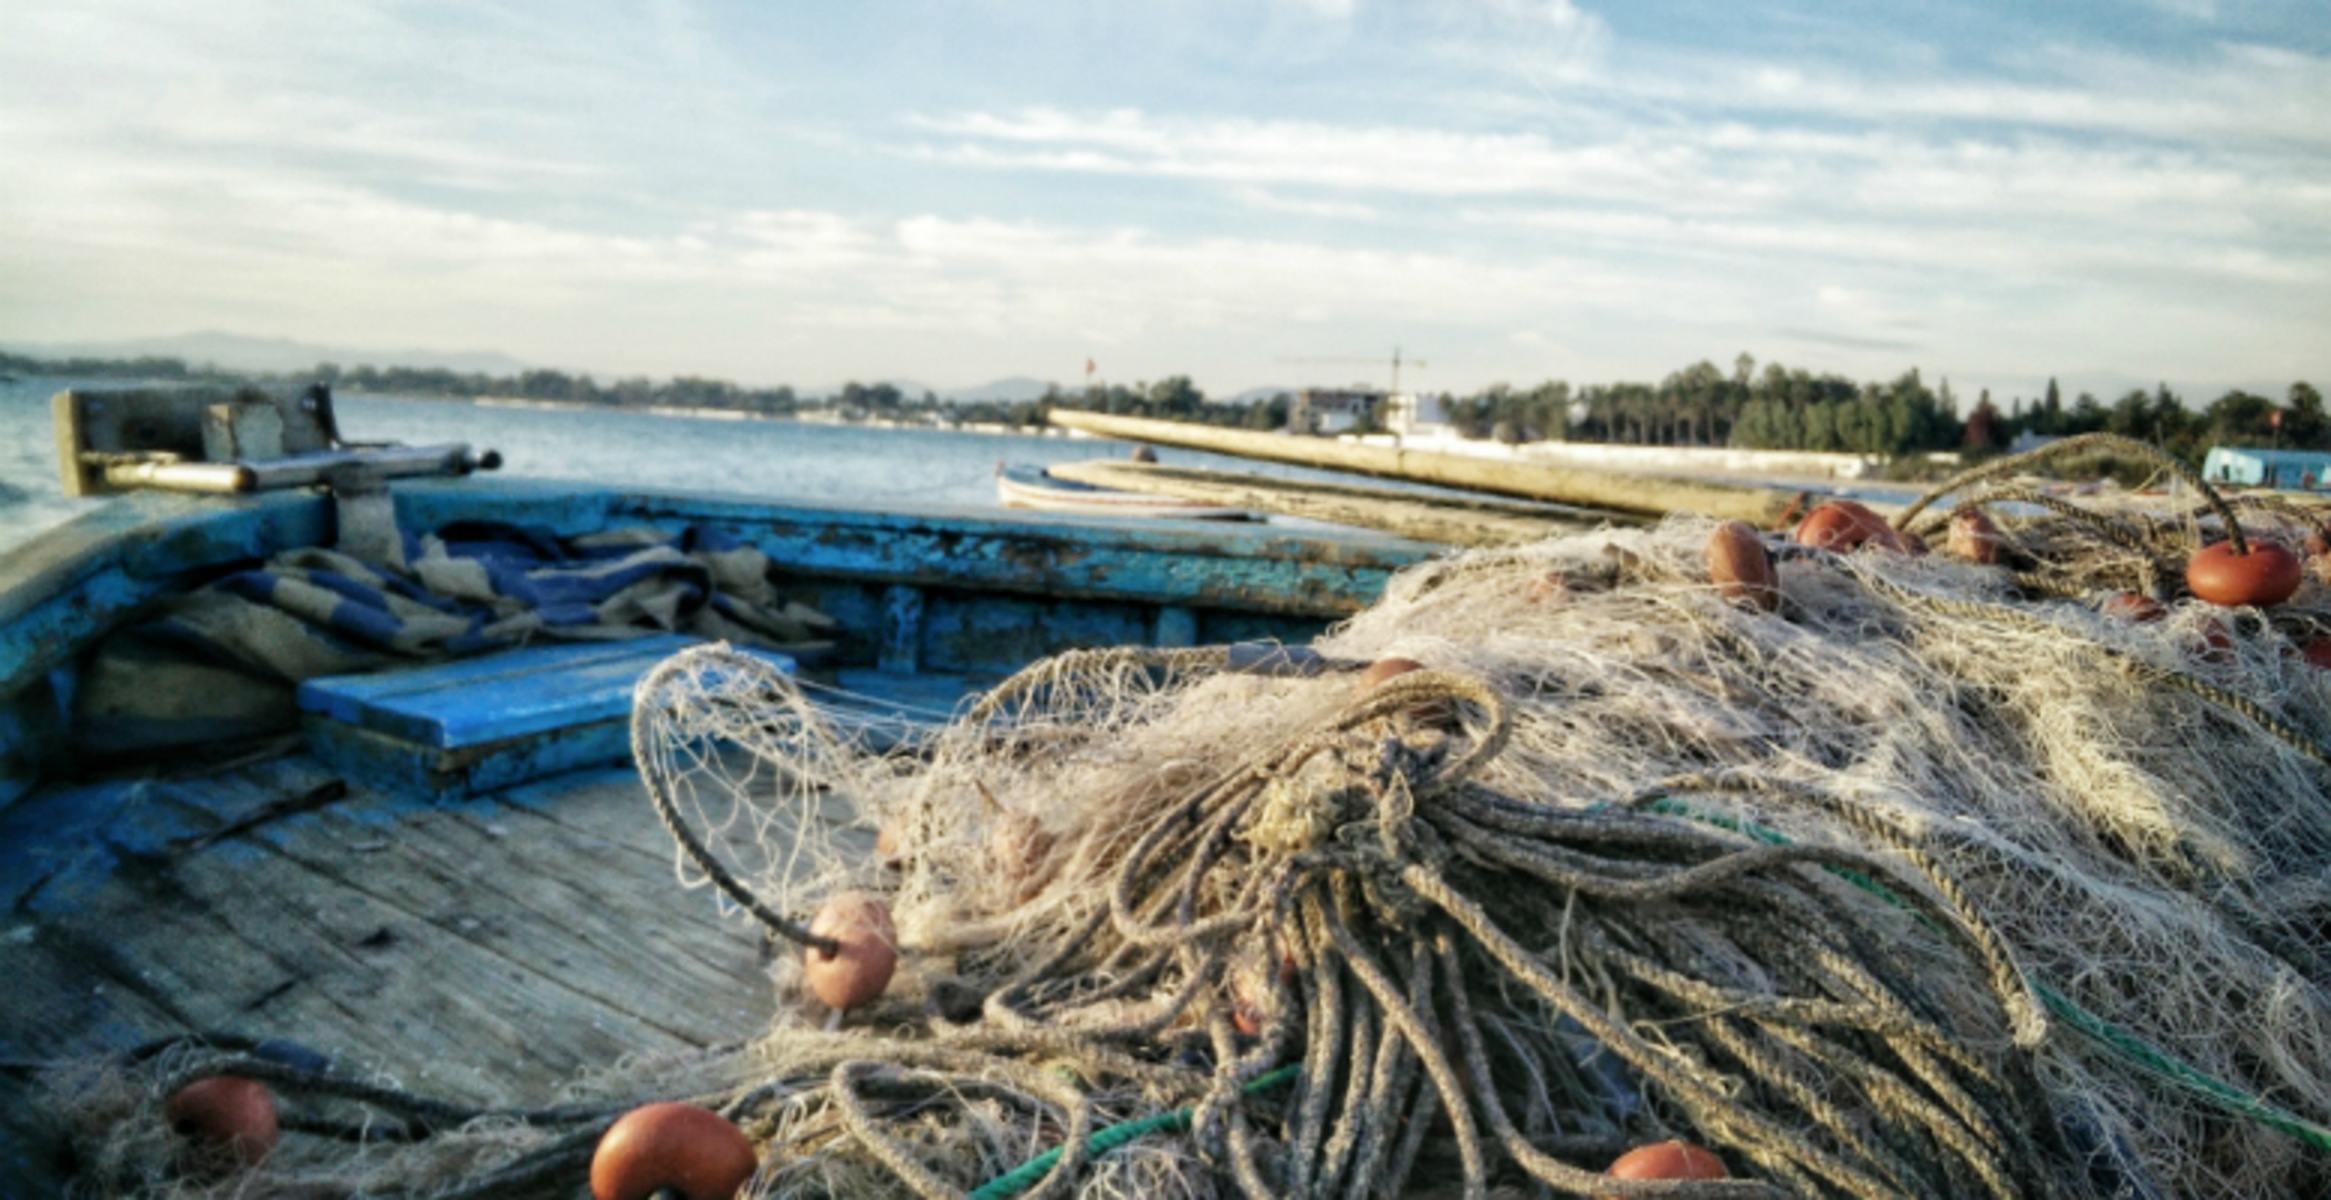 Fish Trap: How poor labelling undermines efforts to make fisheries  sustainable - David Suzuki Foundation